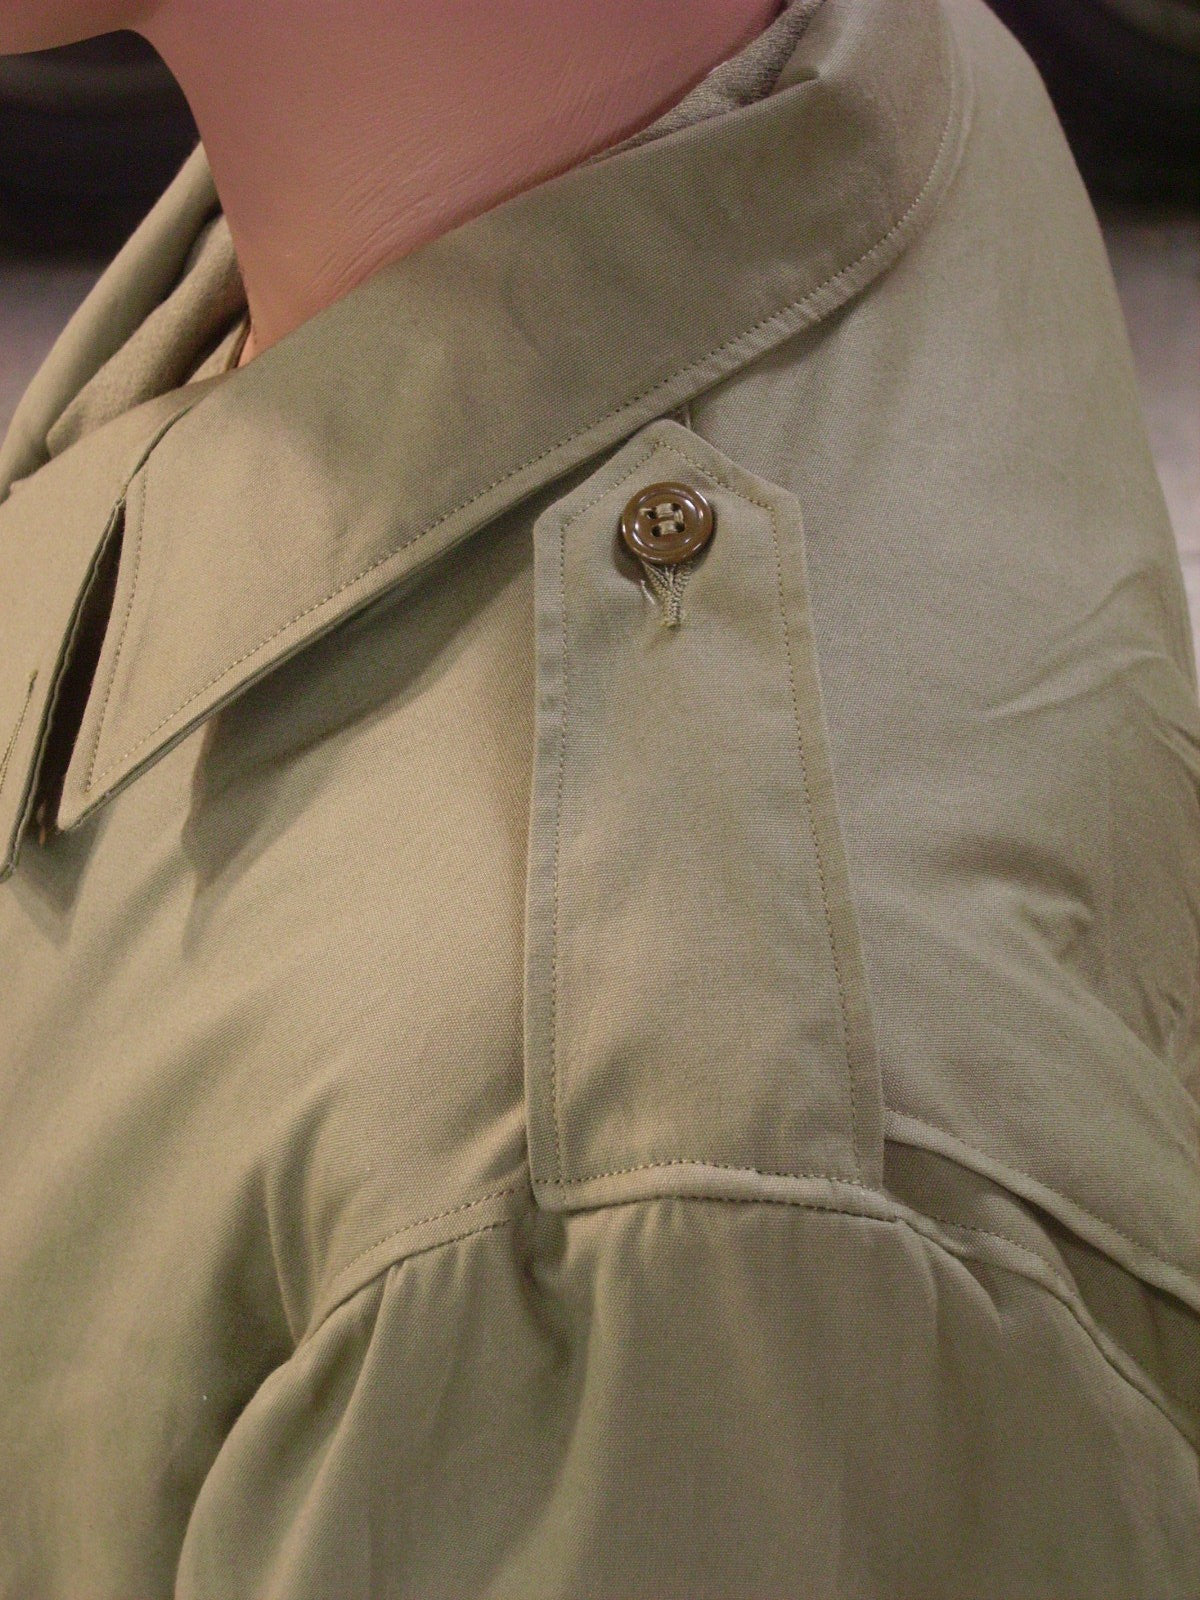 Jacket, Field, OD (M41 with epaulettes) CLOSEOUT sold as-is. All sales final.